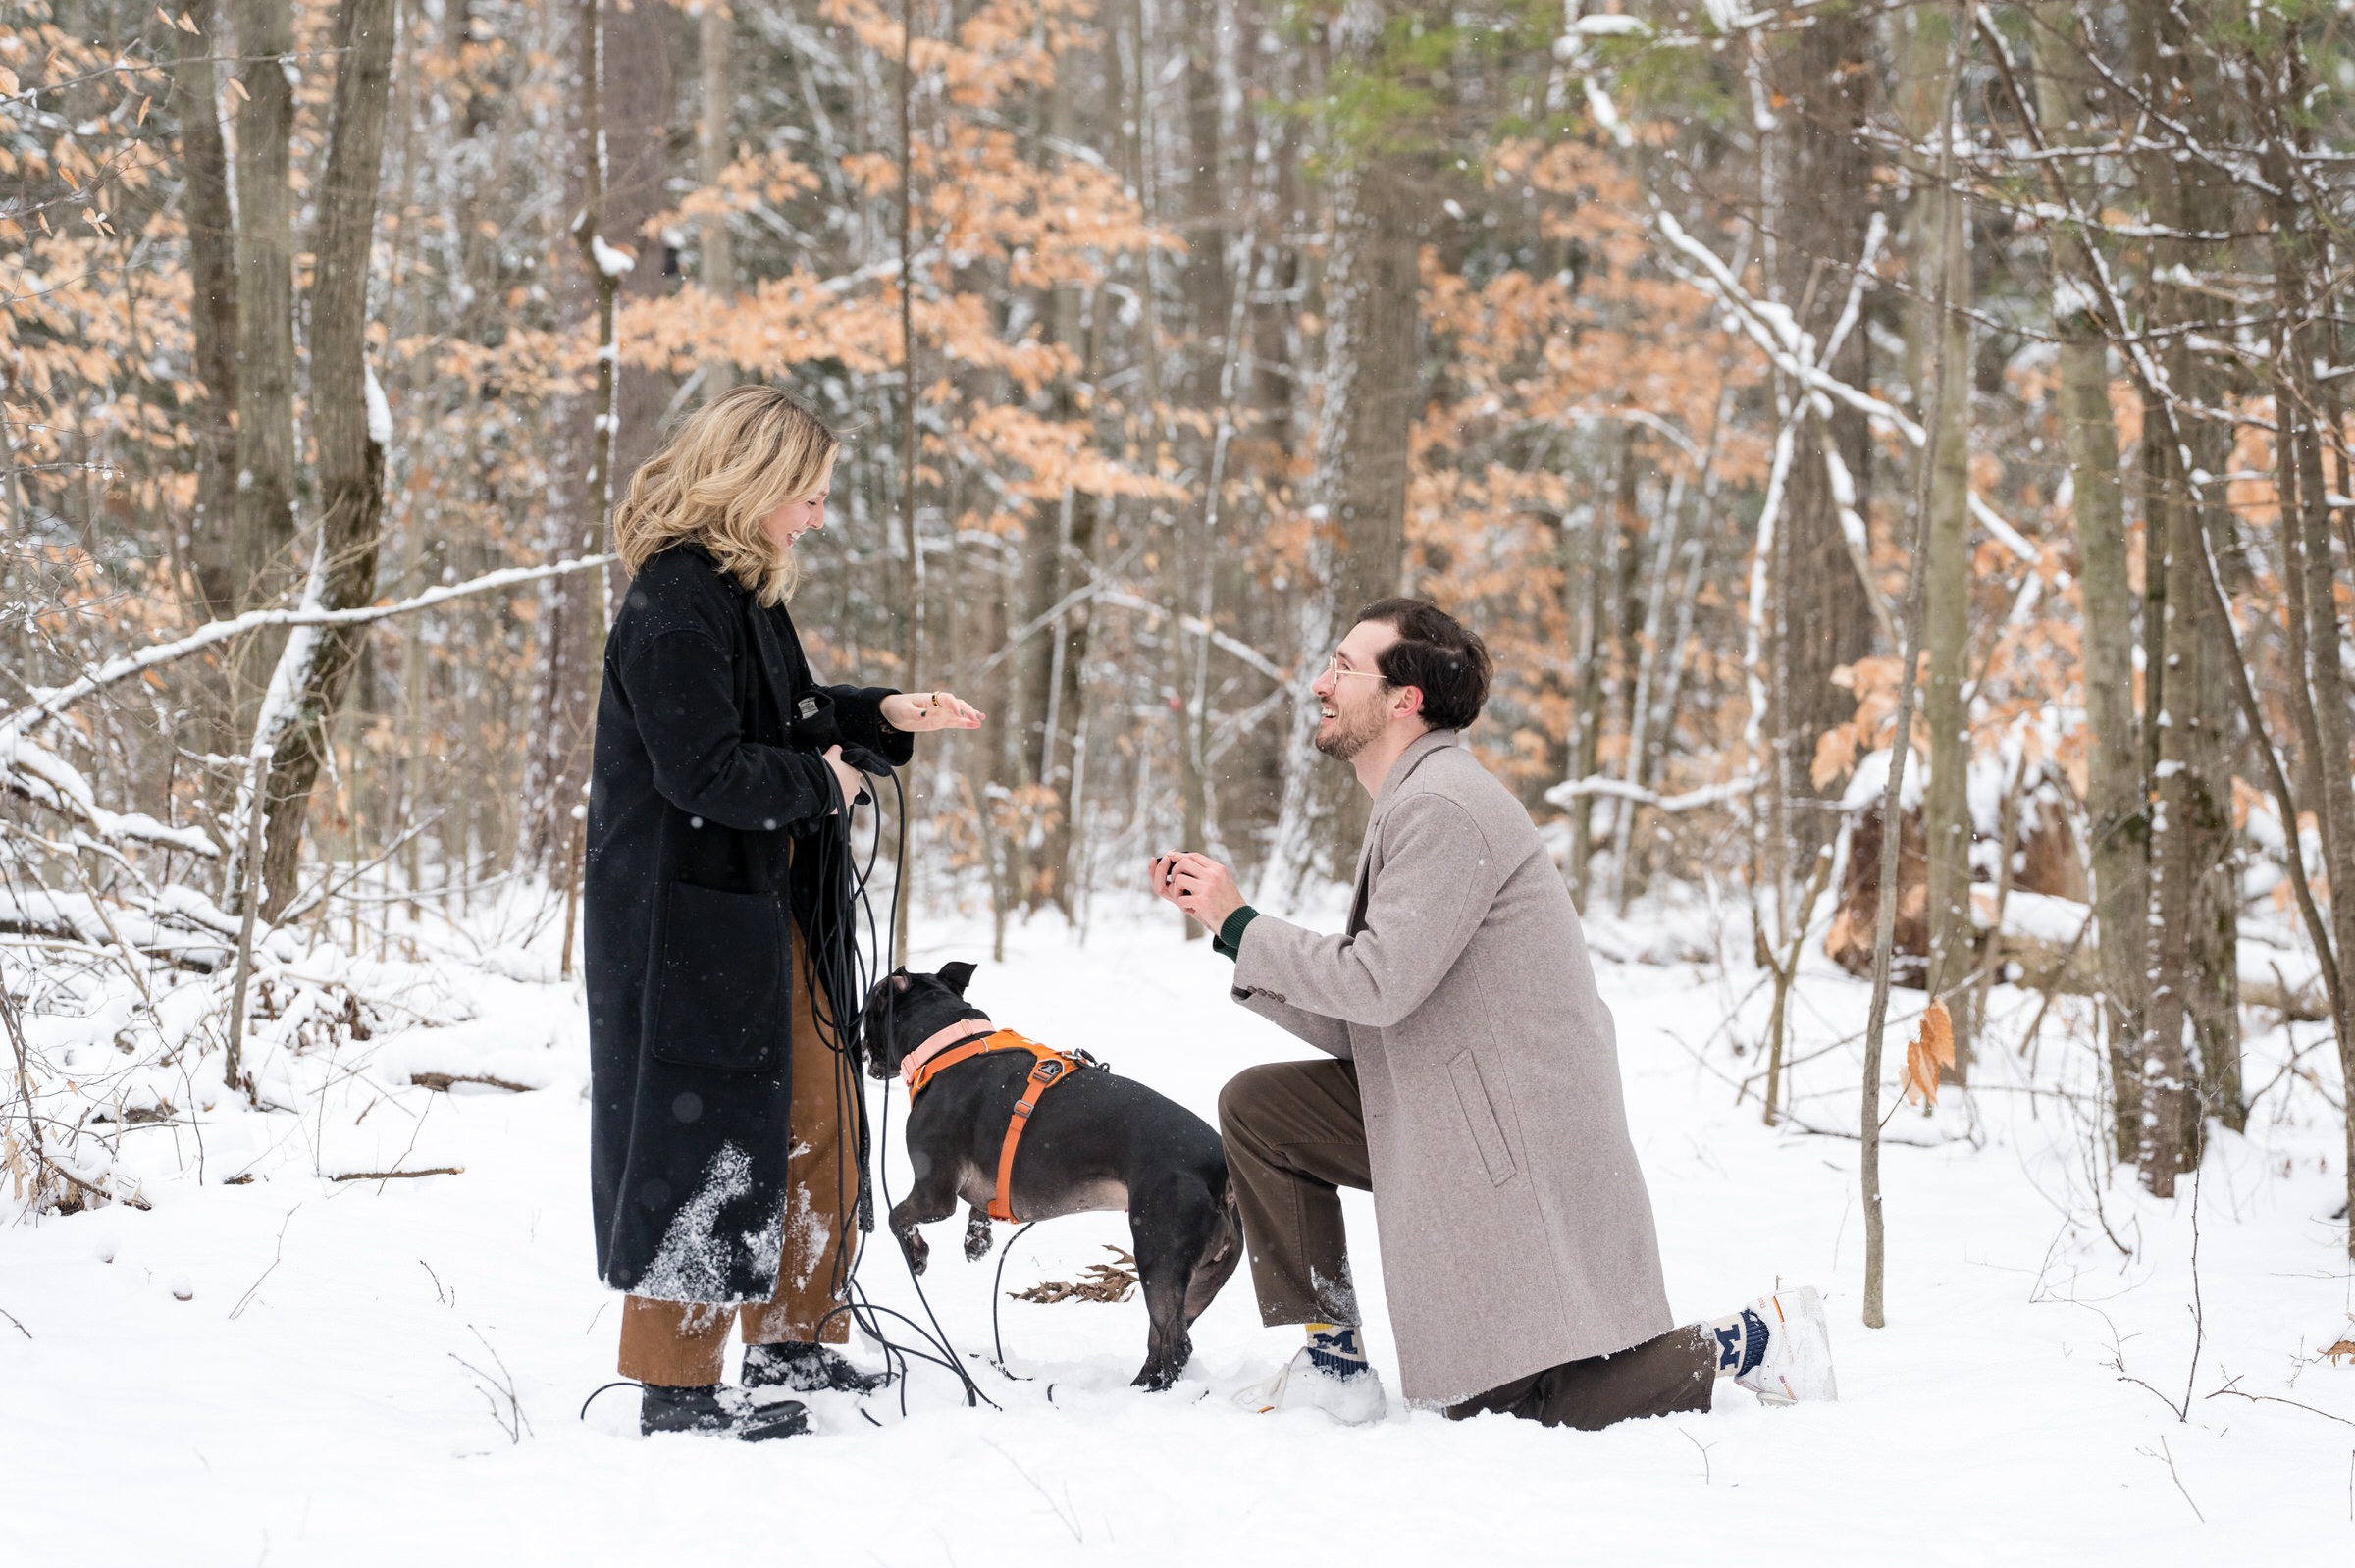 A gentleman stops and proposes in the middle of a snow covered walking path.  